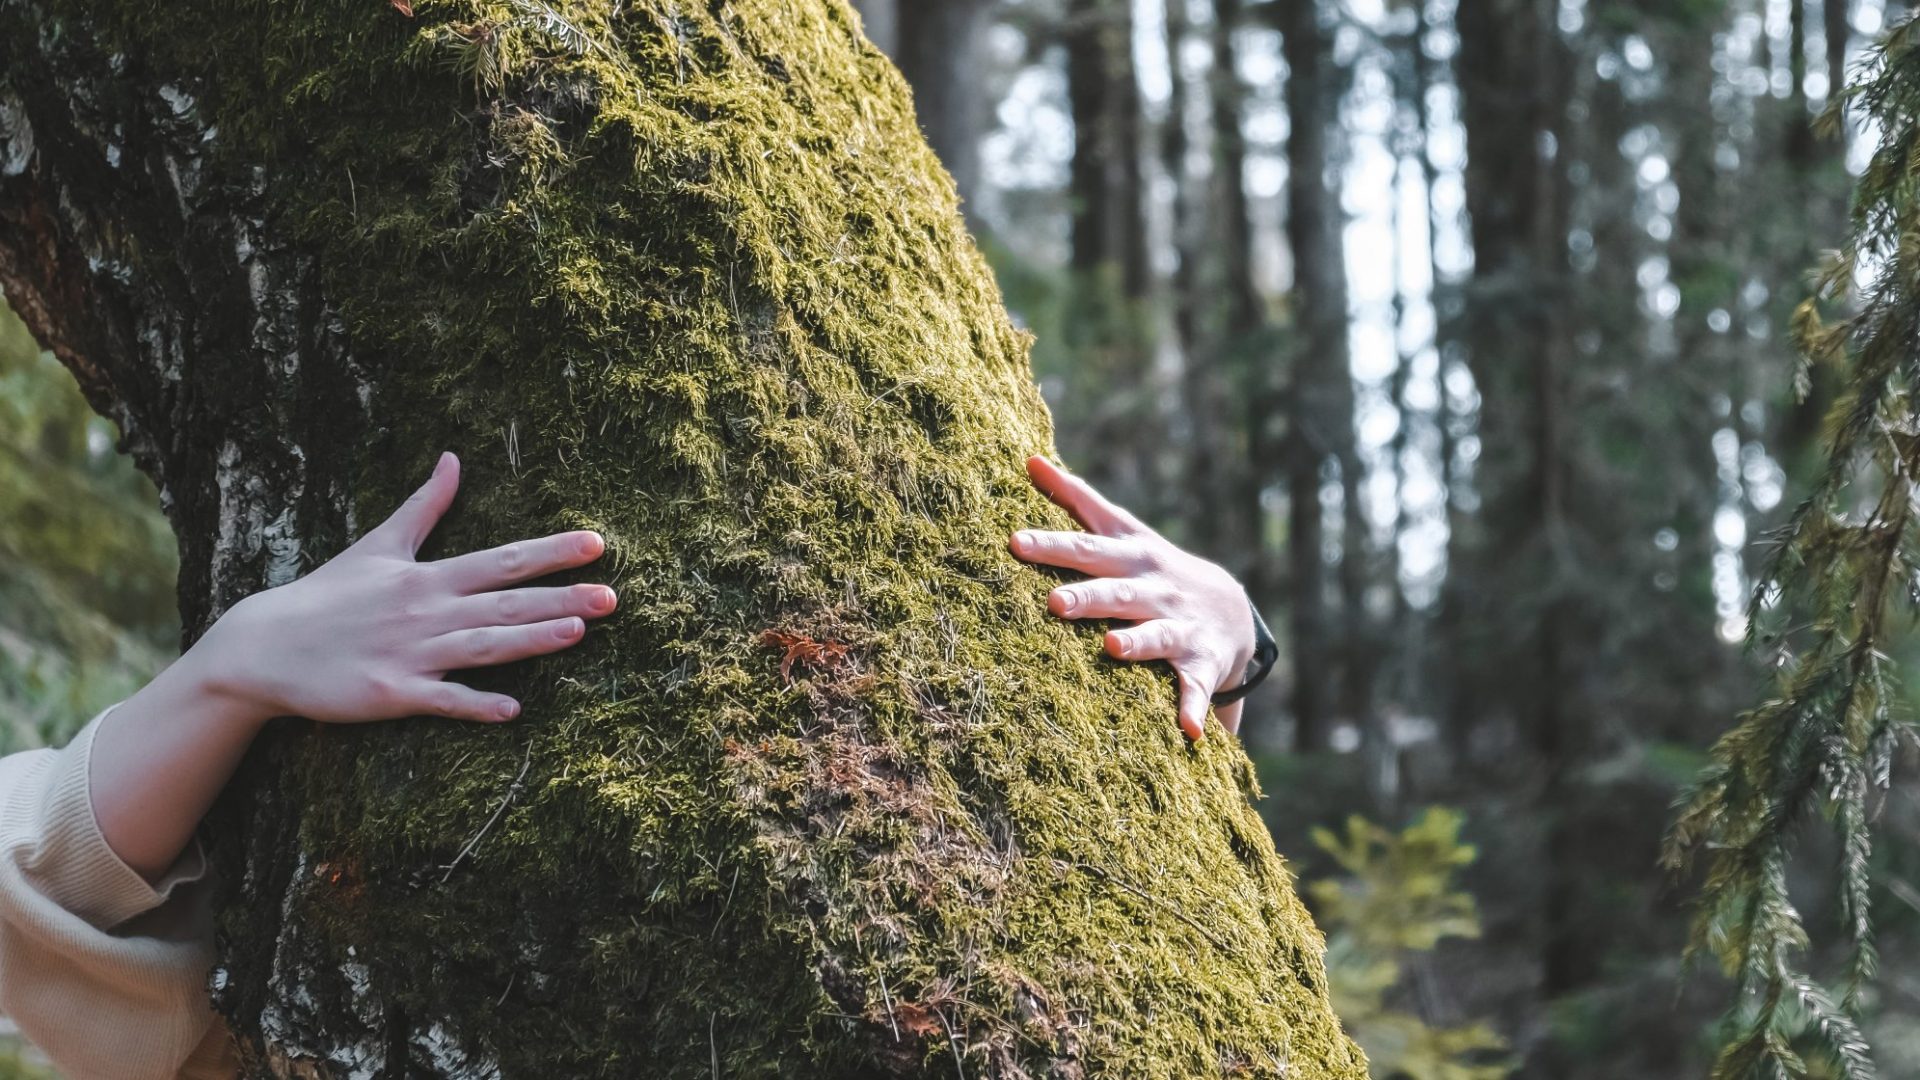 woman love nature hugging a pine tree, no deforestation concept and earth's day celebration,care for the earth, meditation,save our planet for a nice and better future - outdoor leisure activity